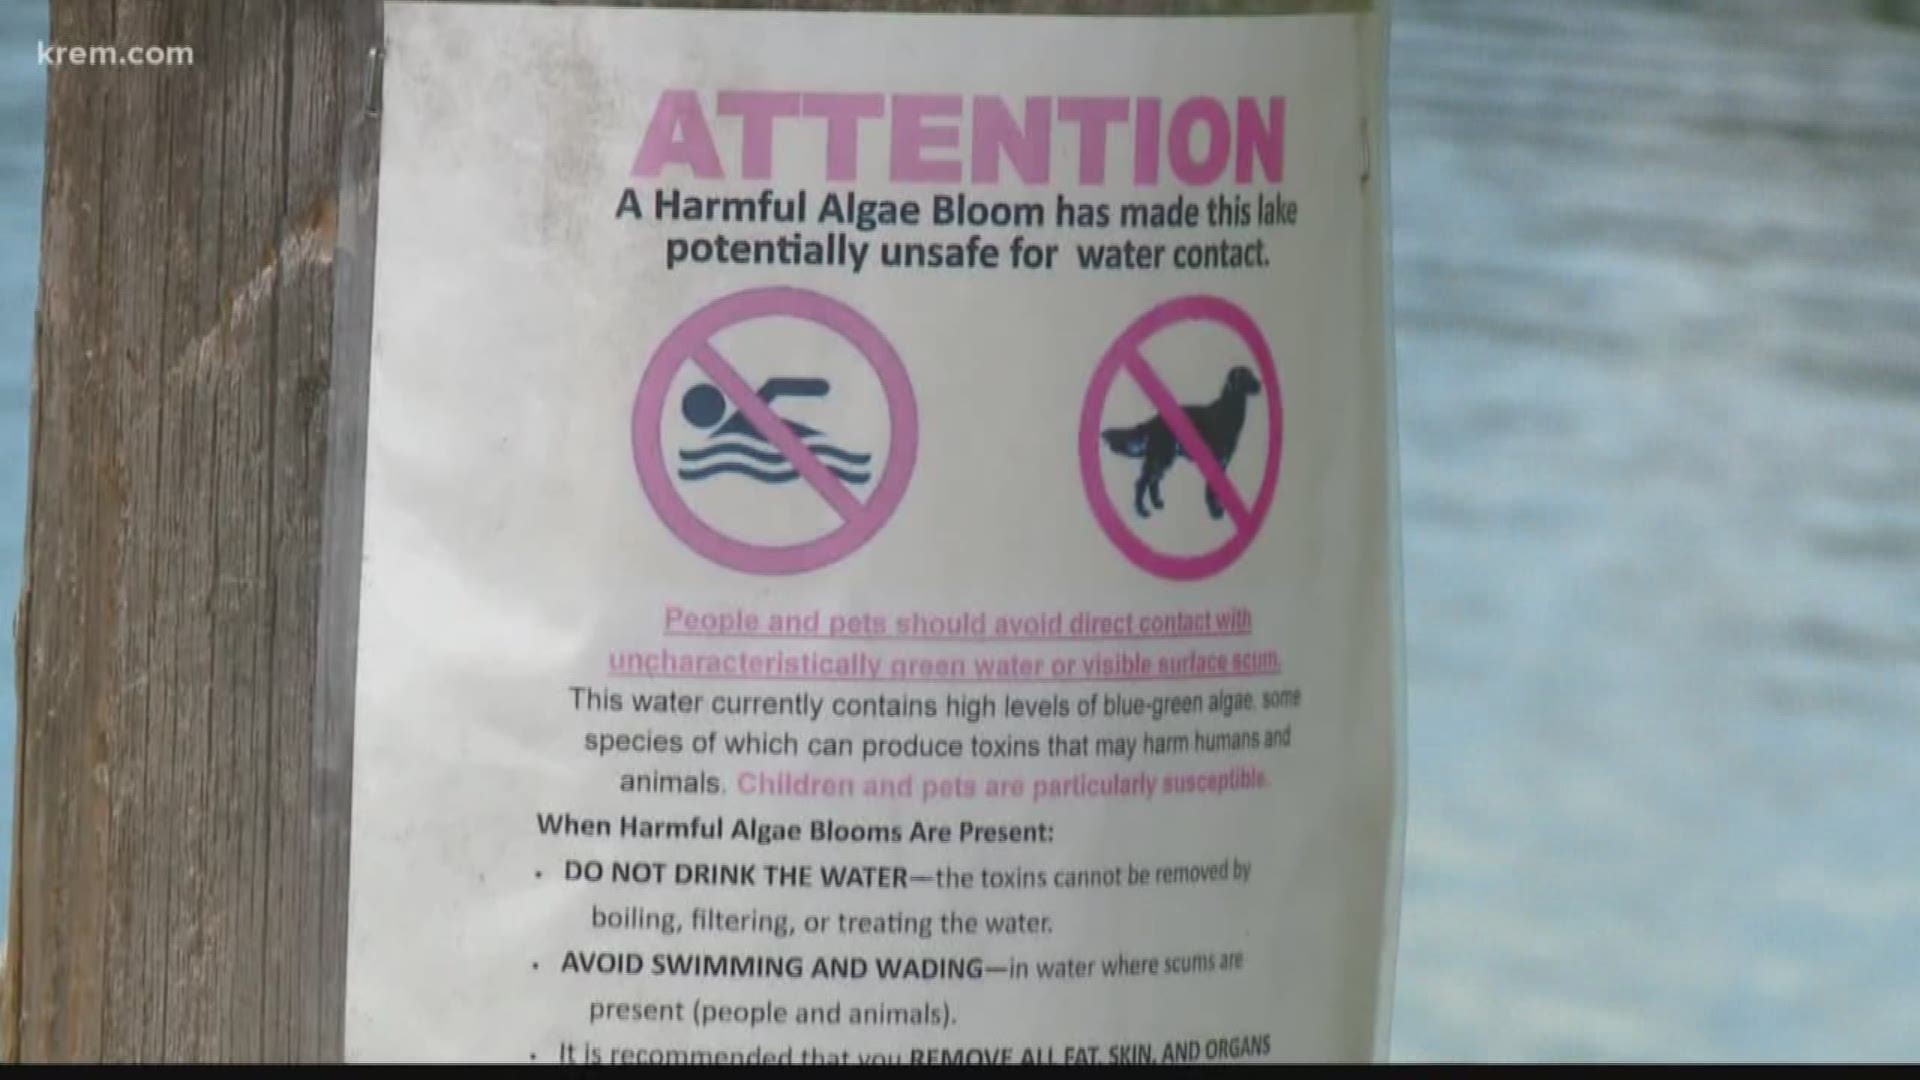 KREM's Taylor Viydo spoke with public health officials about what you should do if you spot an algae bloom in a body of water this summer.